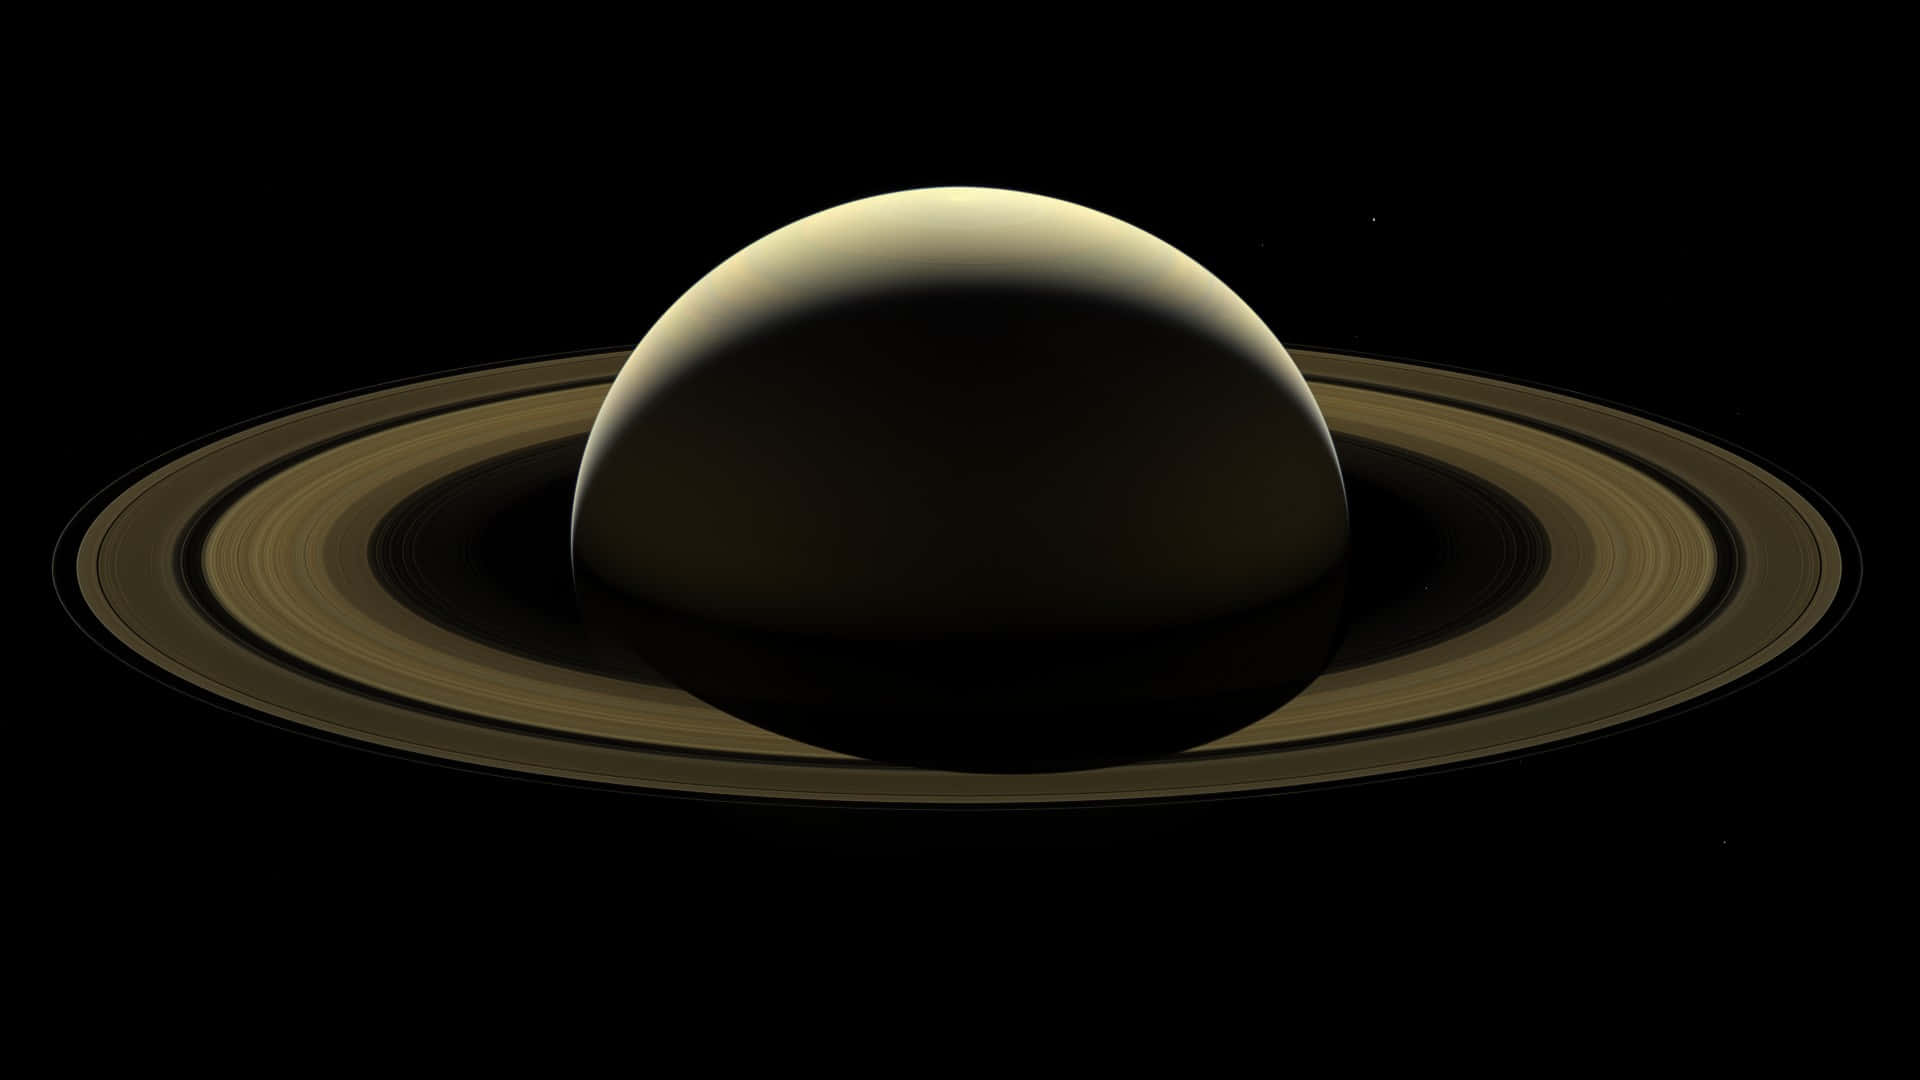 Marvel at the Majesty of Saturn